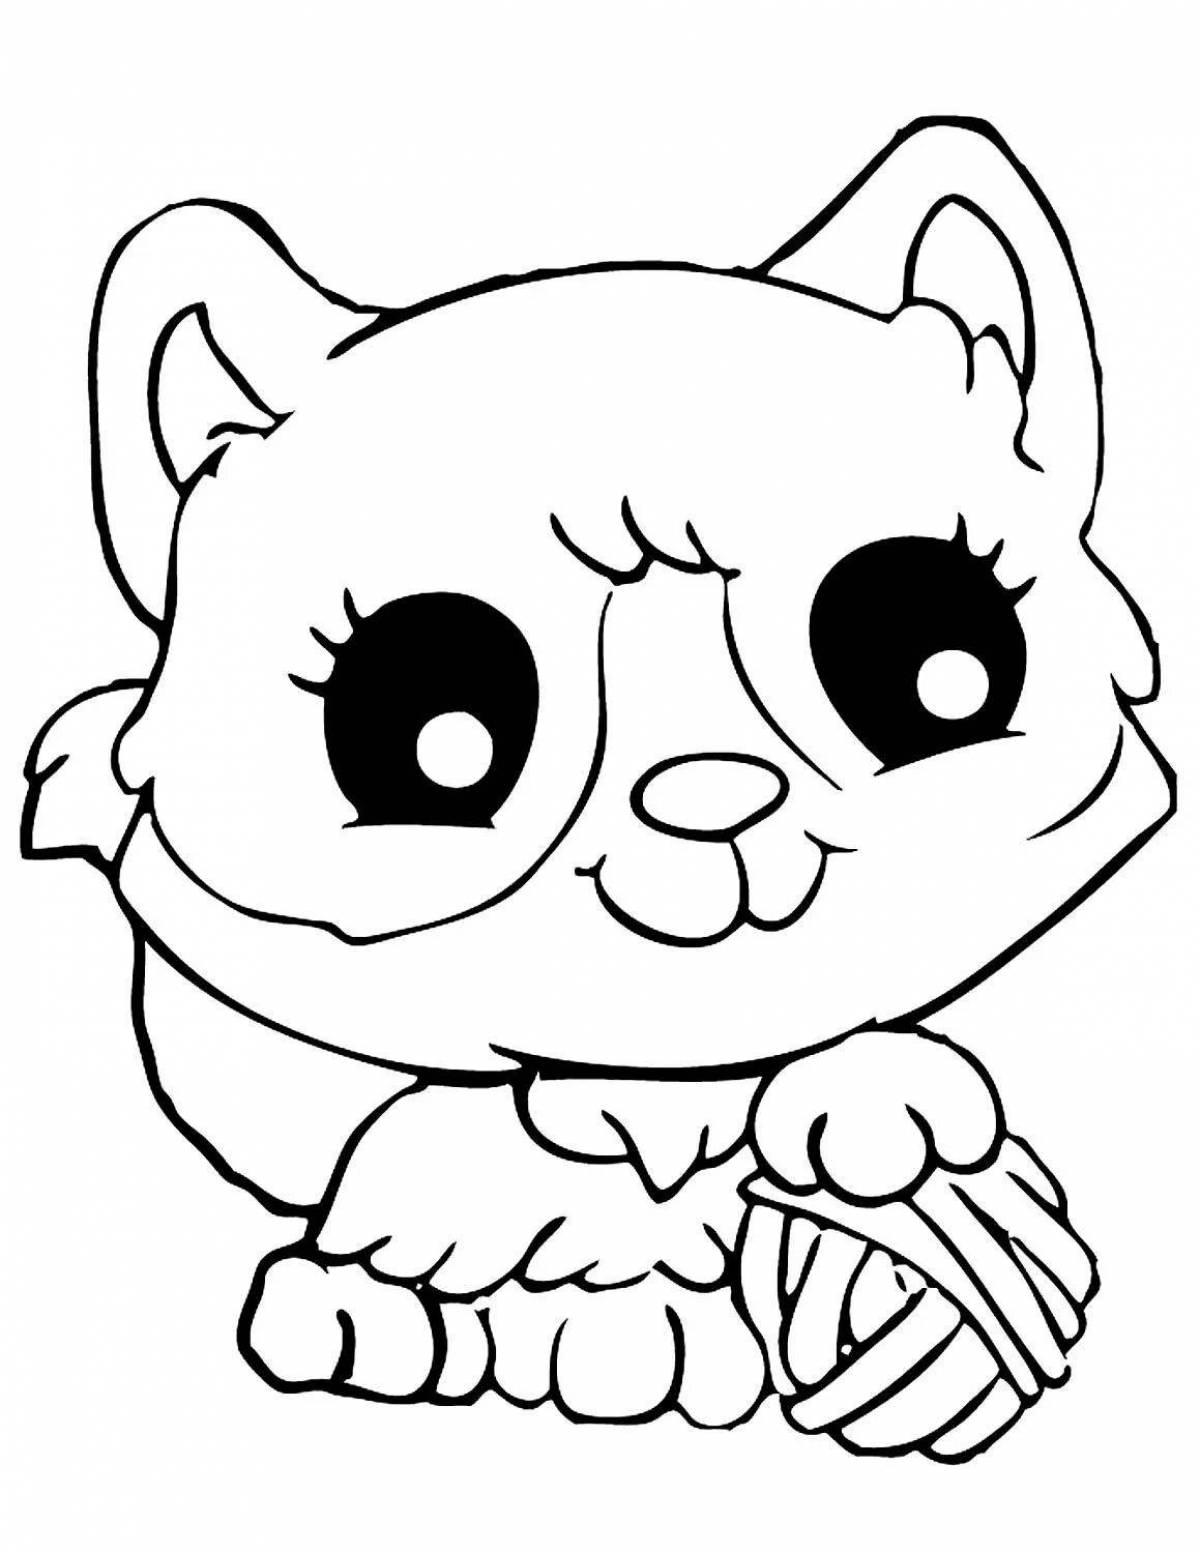 Cute and quirky kitten coloring book